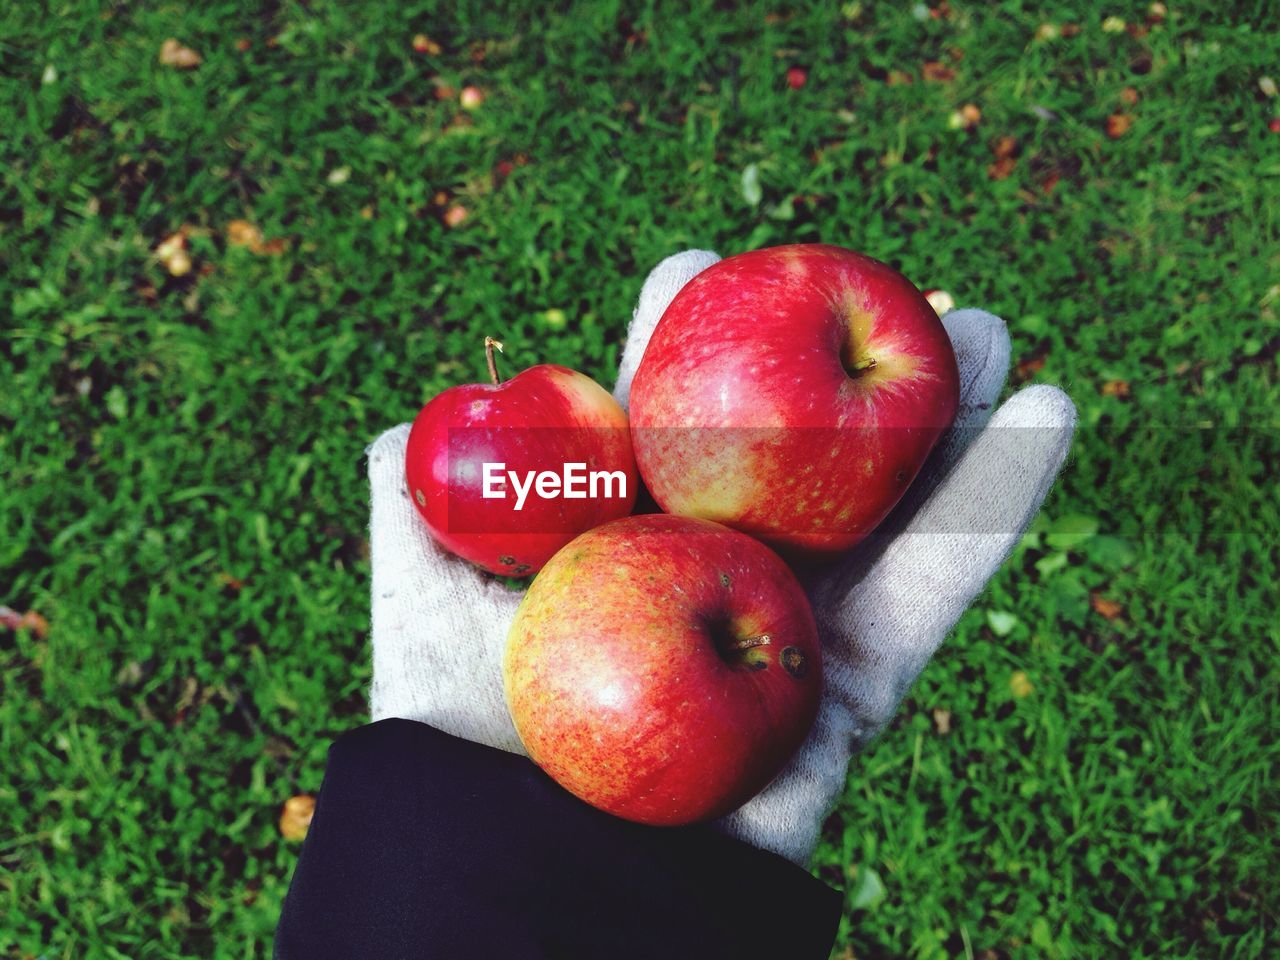 Cropped hand holding apples over grassy field